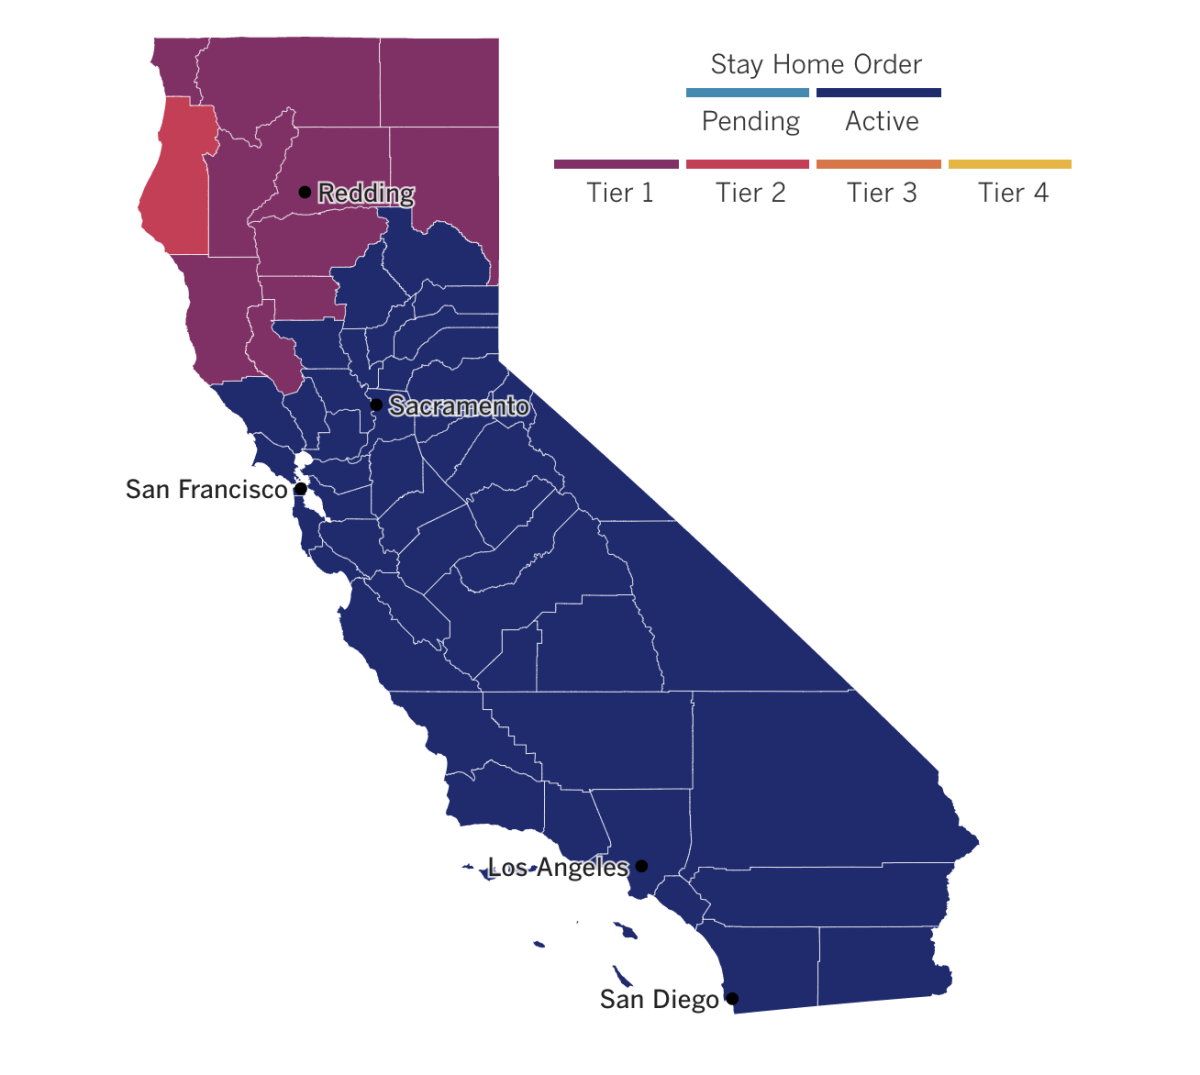 A map showing most of California under stay-at-home order, most northern counties in Tier 1 and Humboldt County in Tier 2.